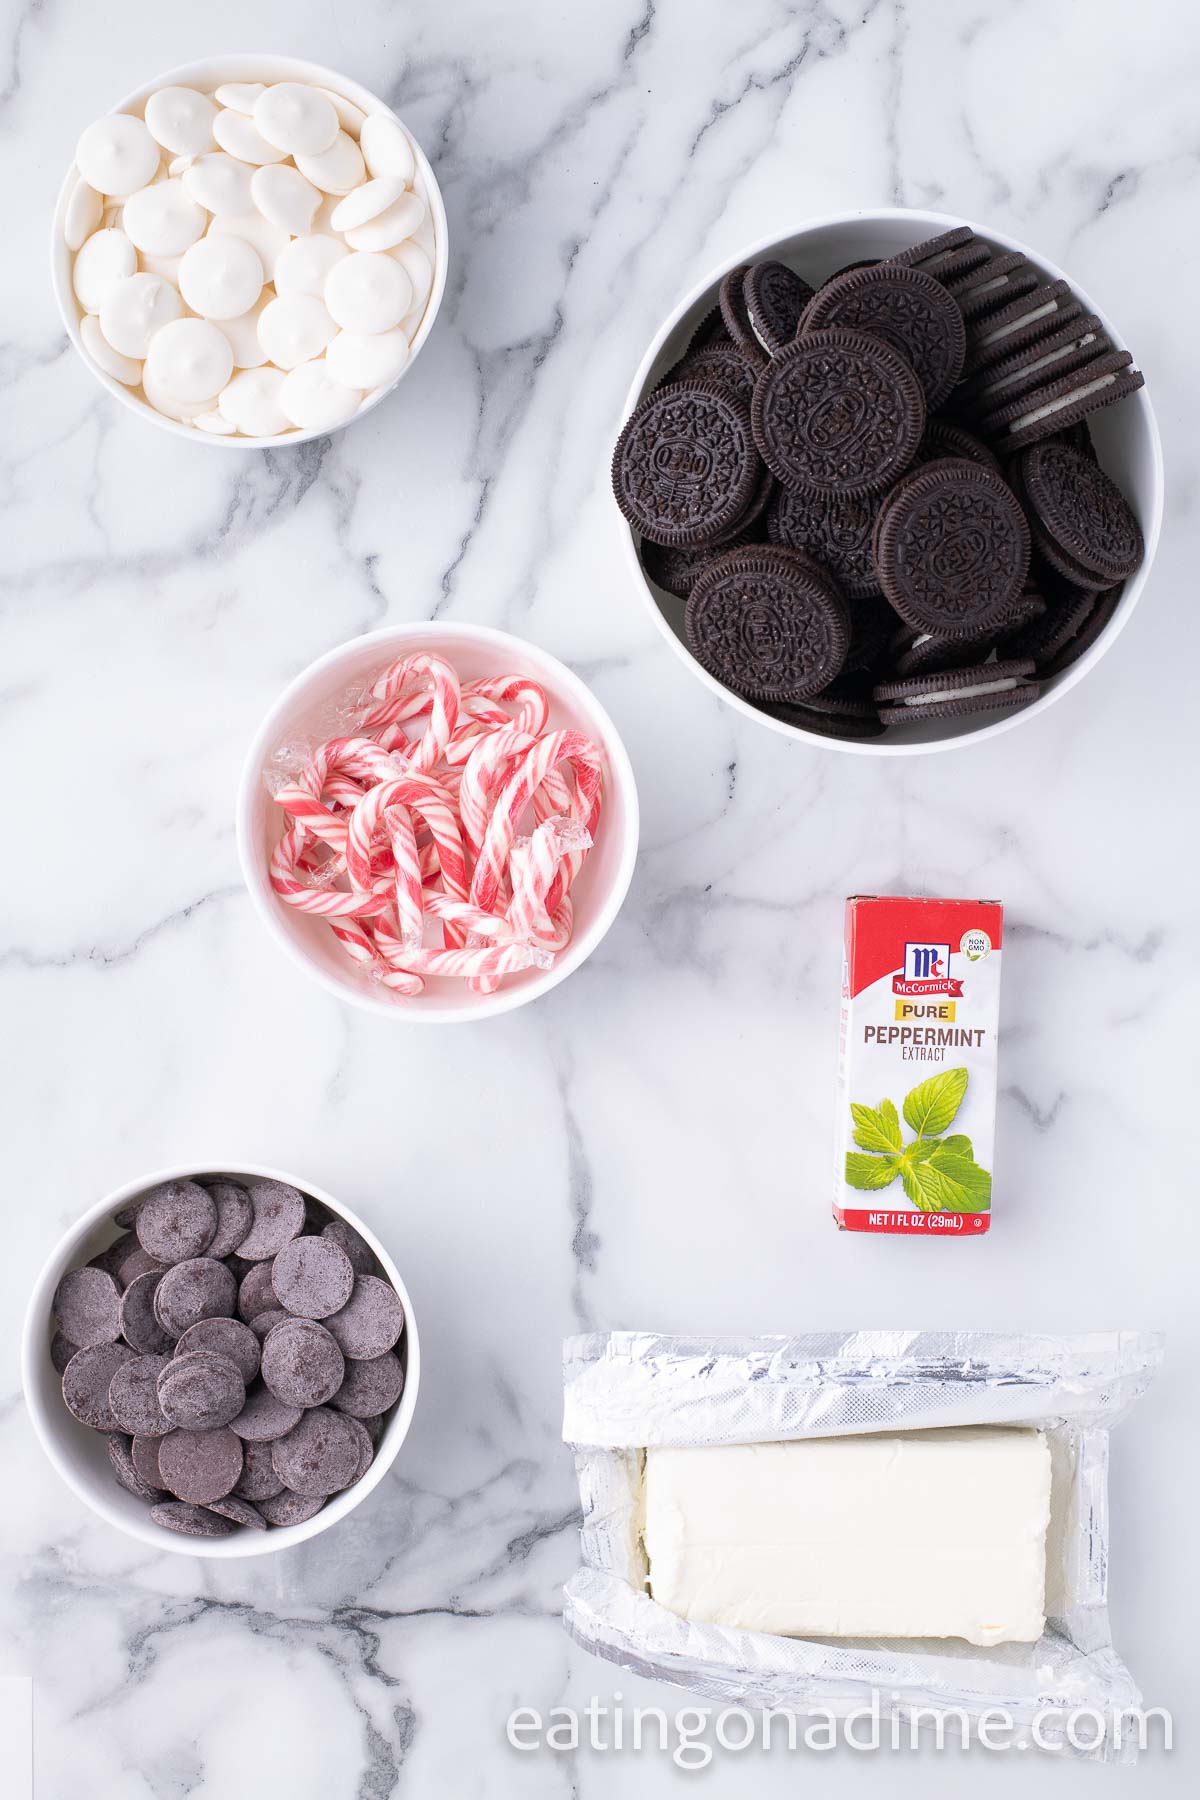 Ingredients Peppermint Oreo Balls - cream cheese, Oreo Cookies, Peppermint Extract, Candy Wafers. Candy Canes